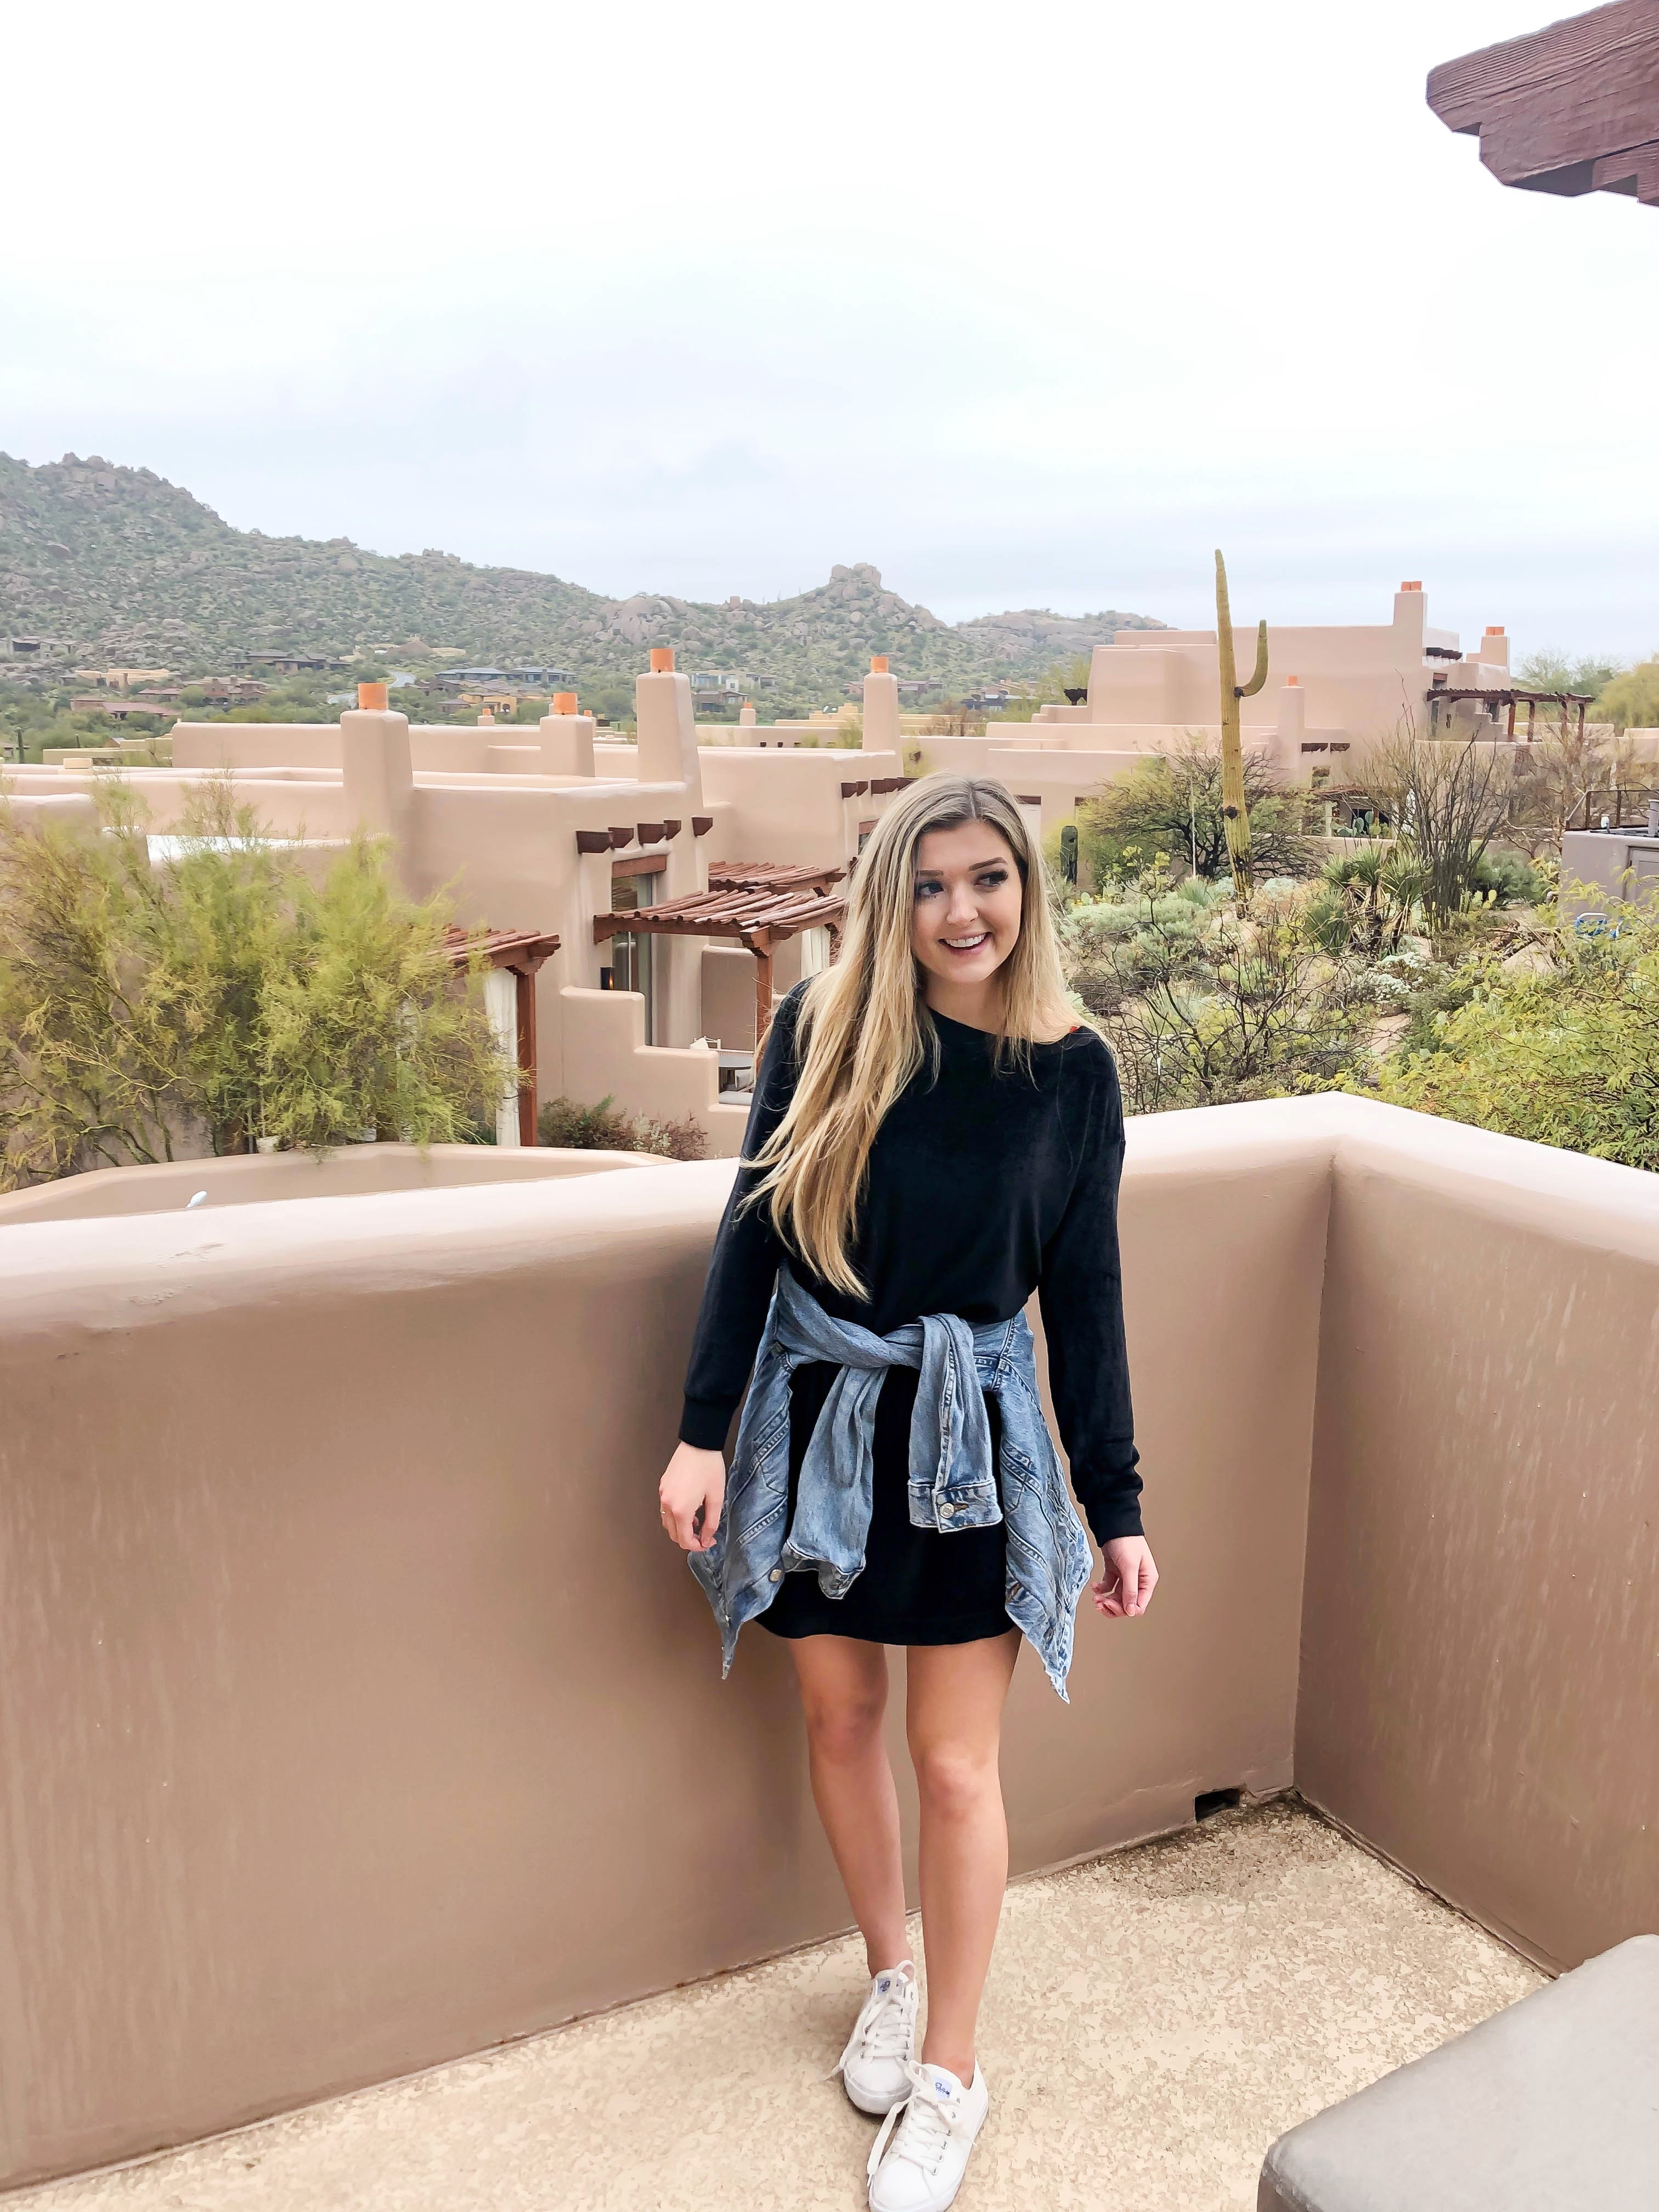 Scottsdale Arizona four seasons comfy outfit spring fashion blog daily dose of charm lauren lindmark 